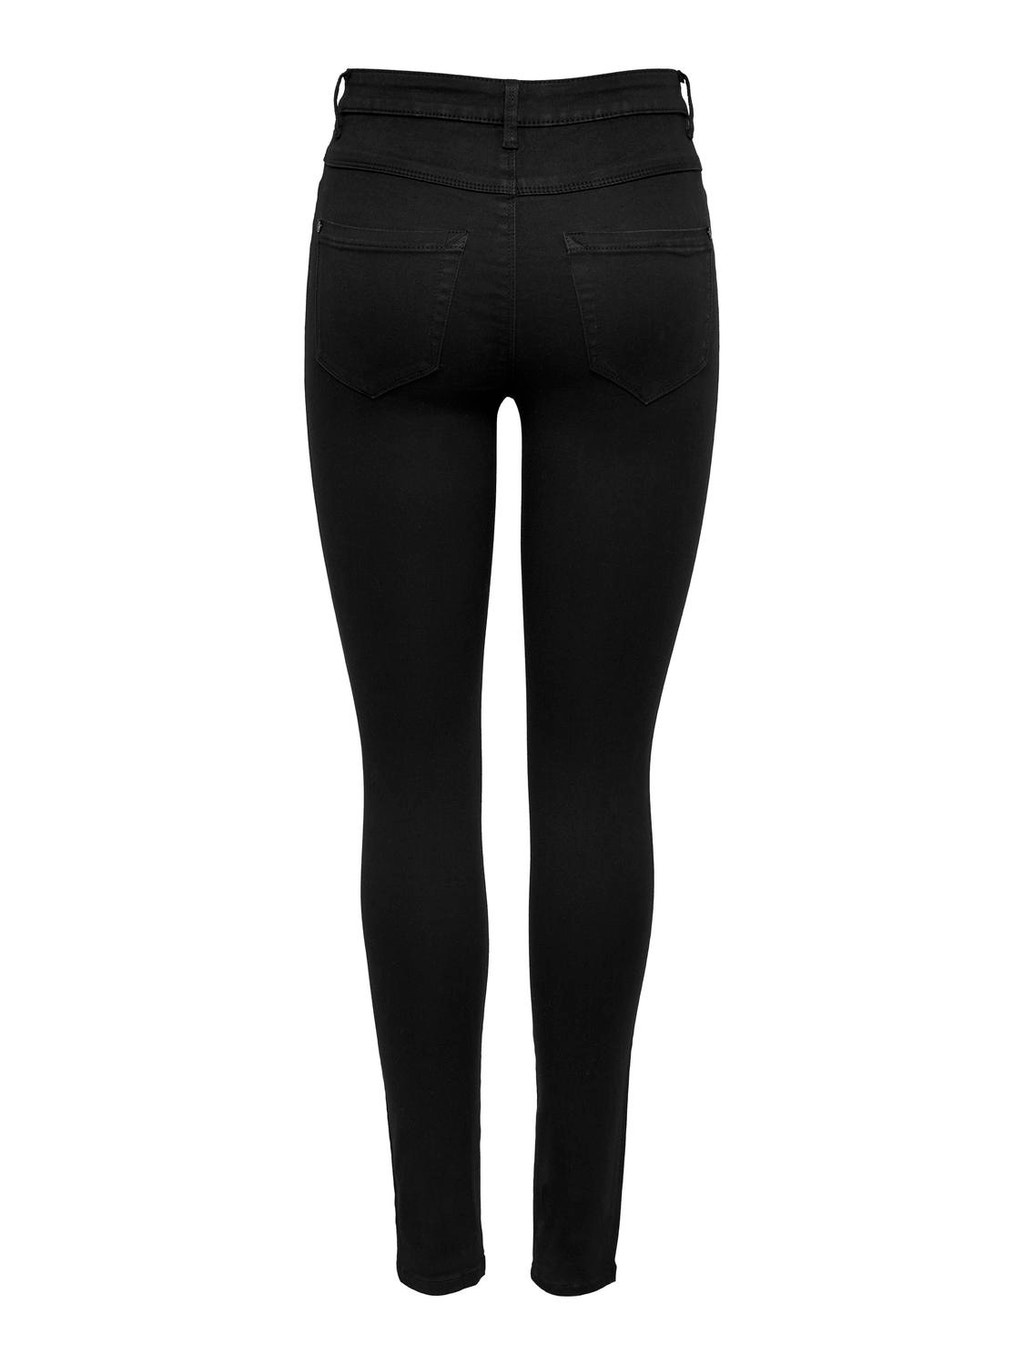 ONLRoyal high Skinny fit jeans | Black | ONLY®